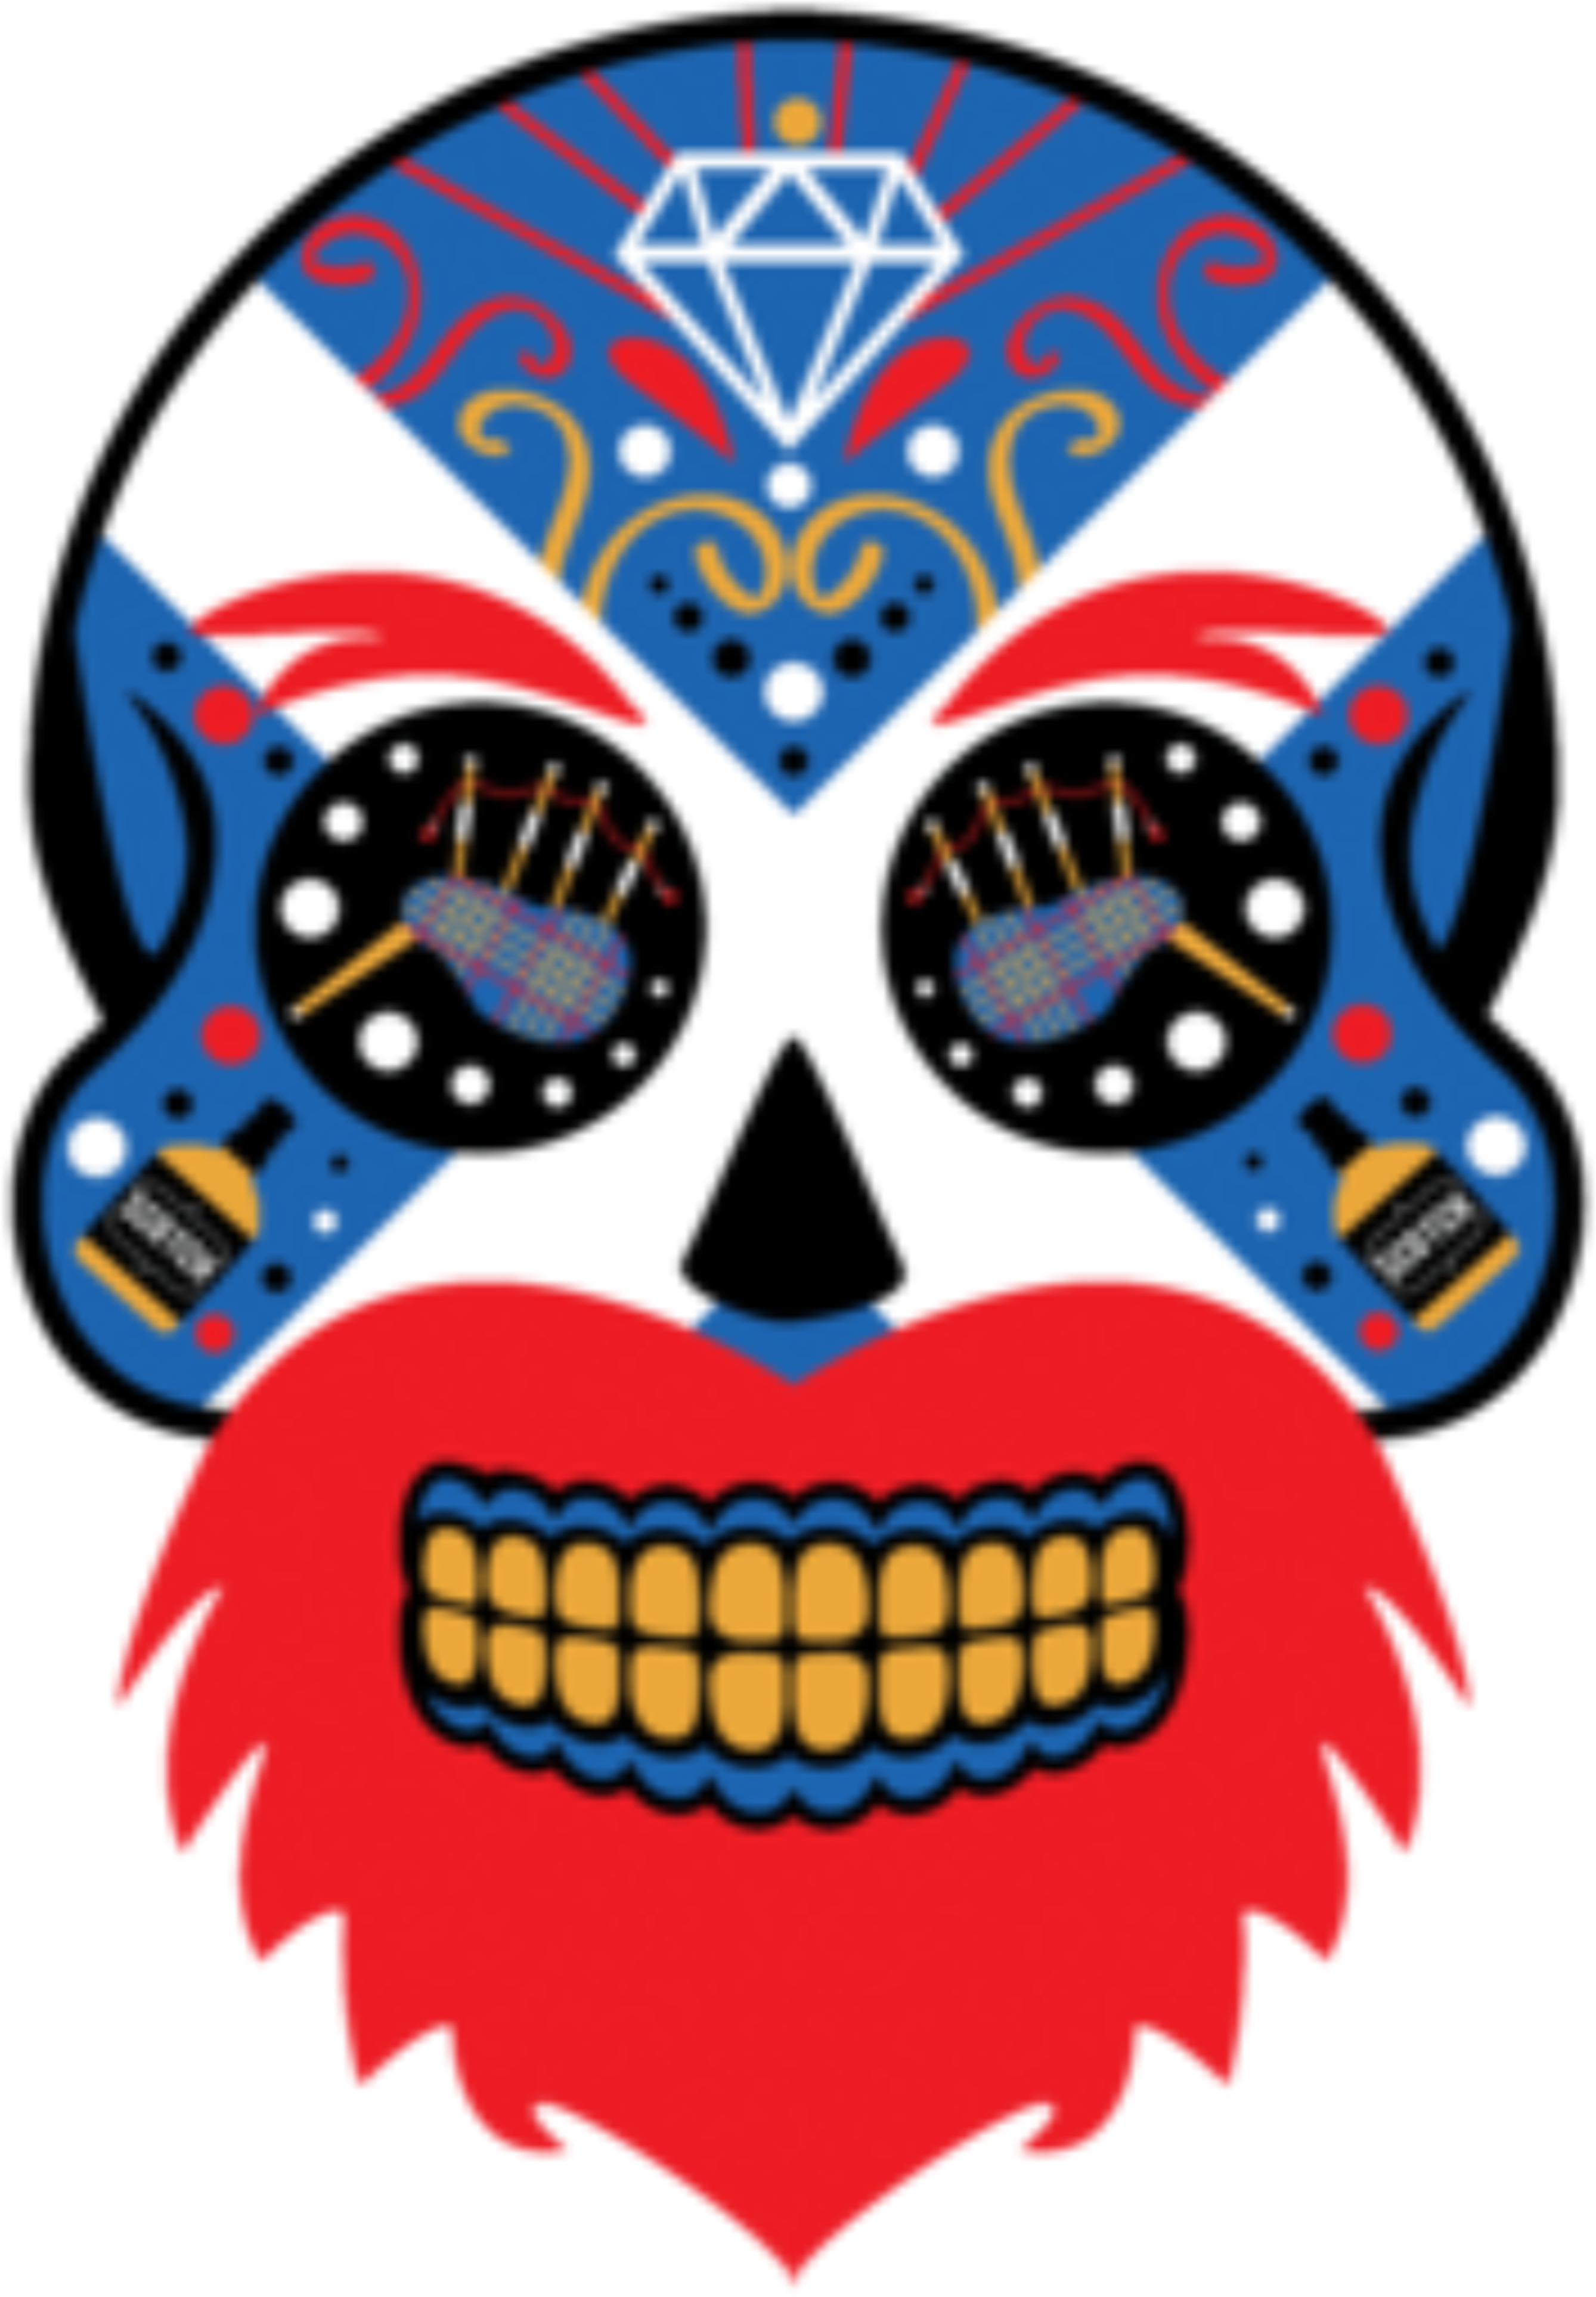 We Took Elements Of Scotland And Infused Them With - Scottish Sugar Skull (4500x5400)